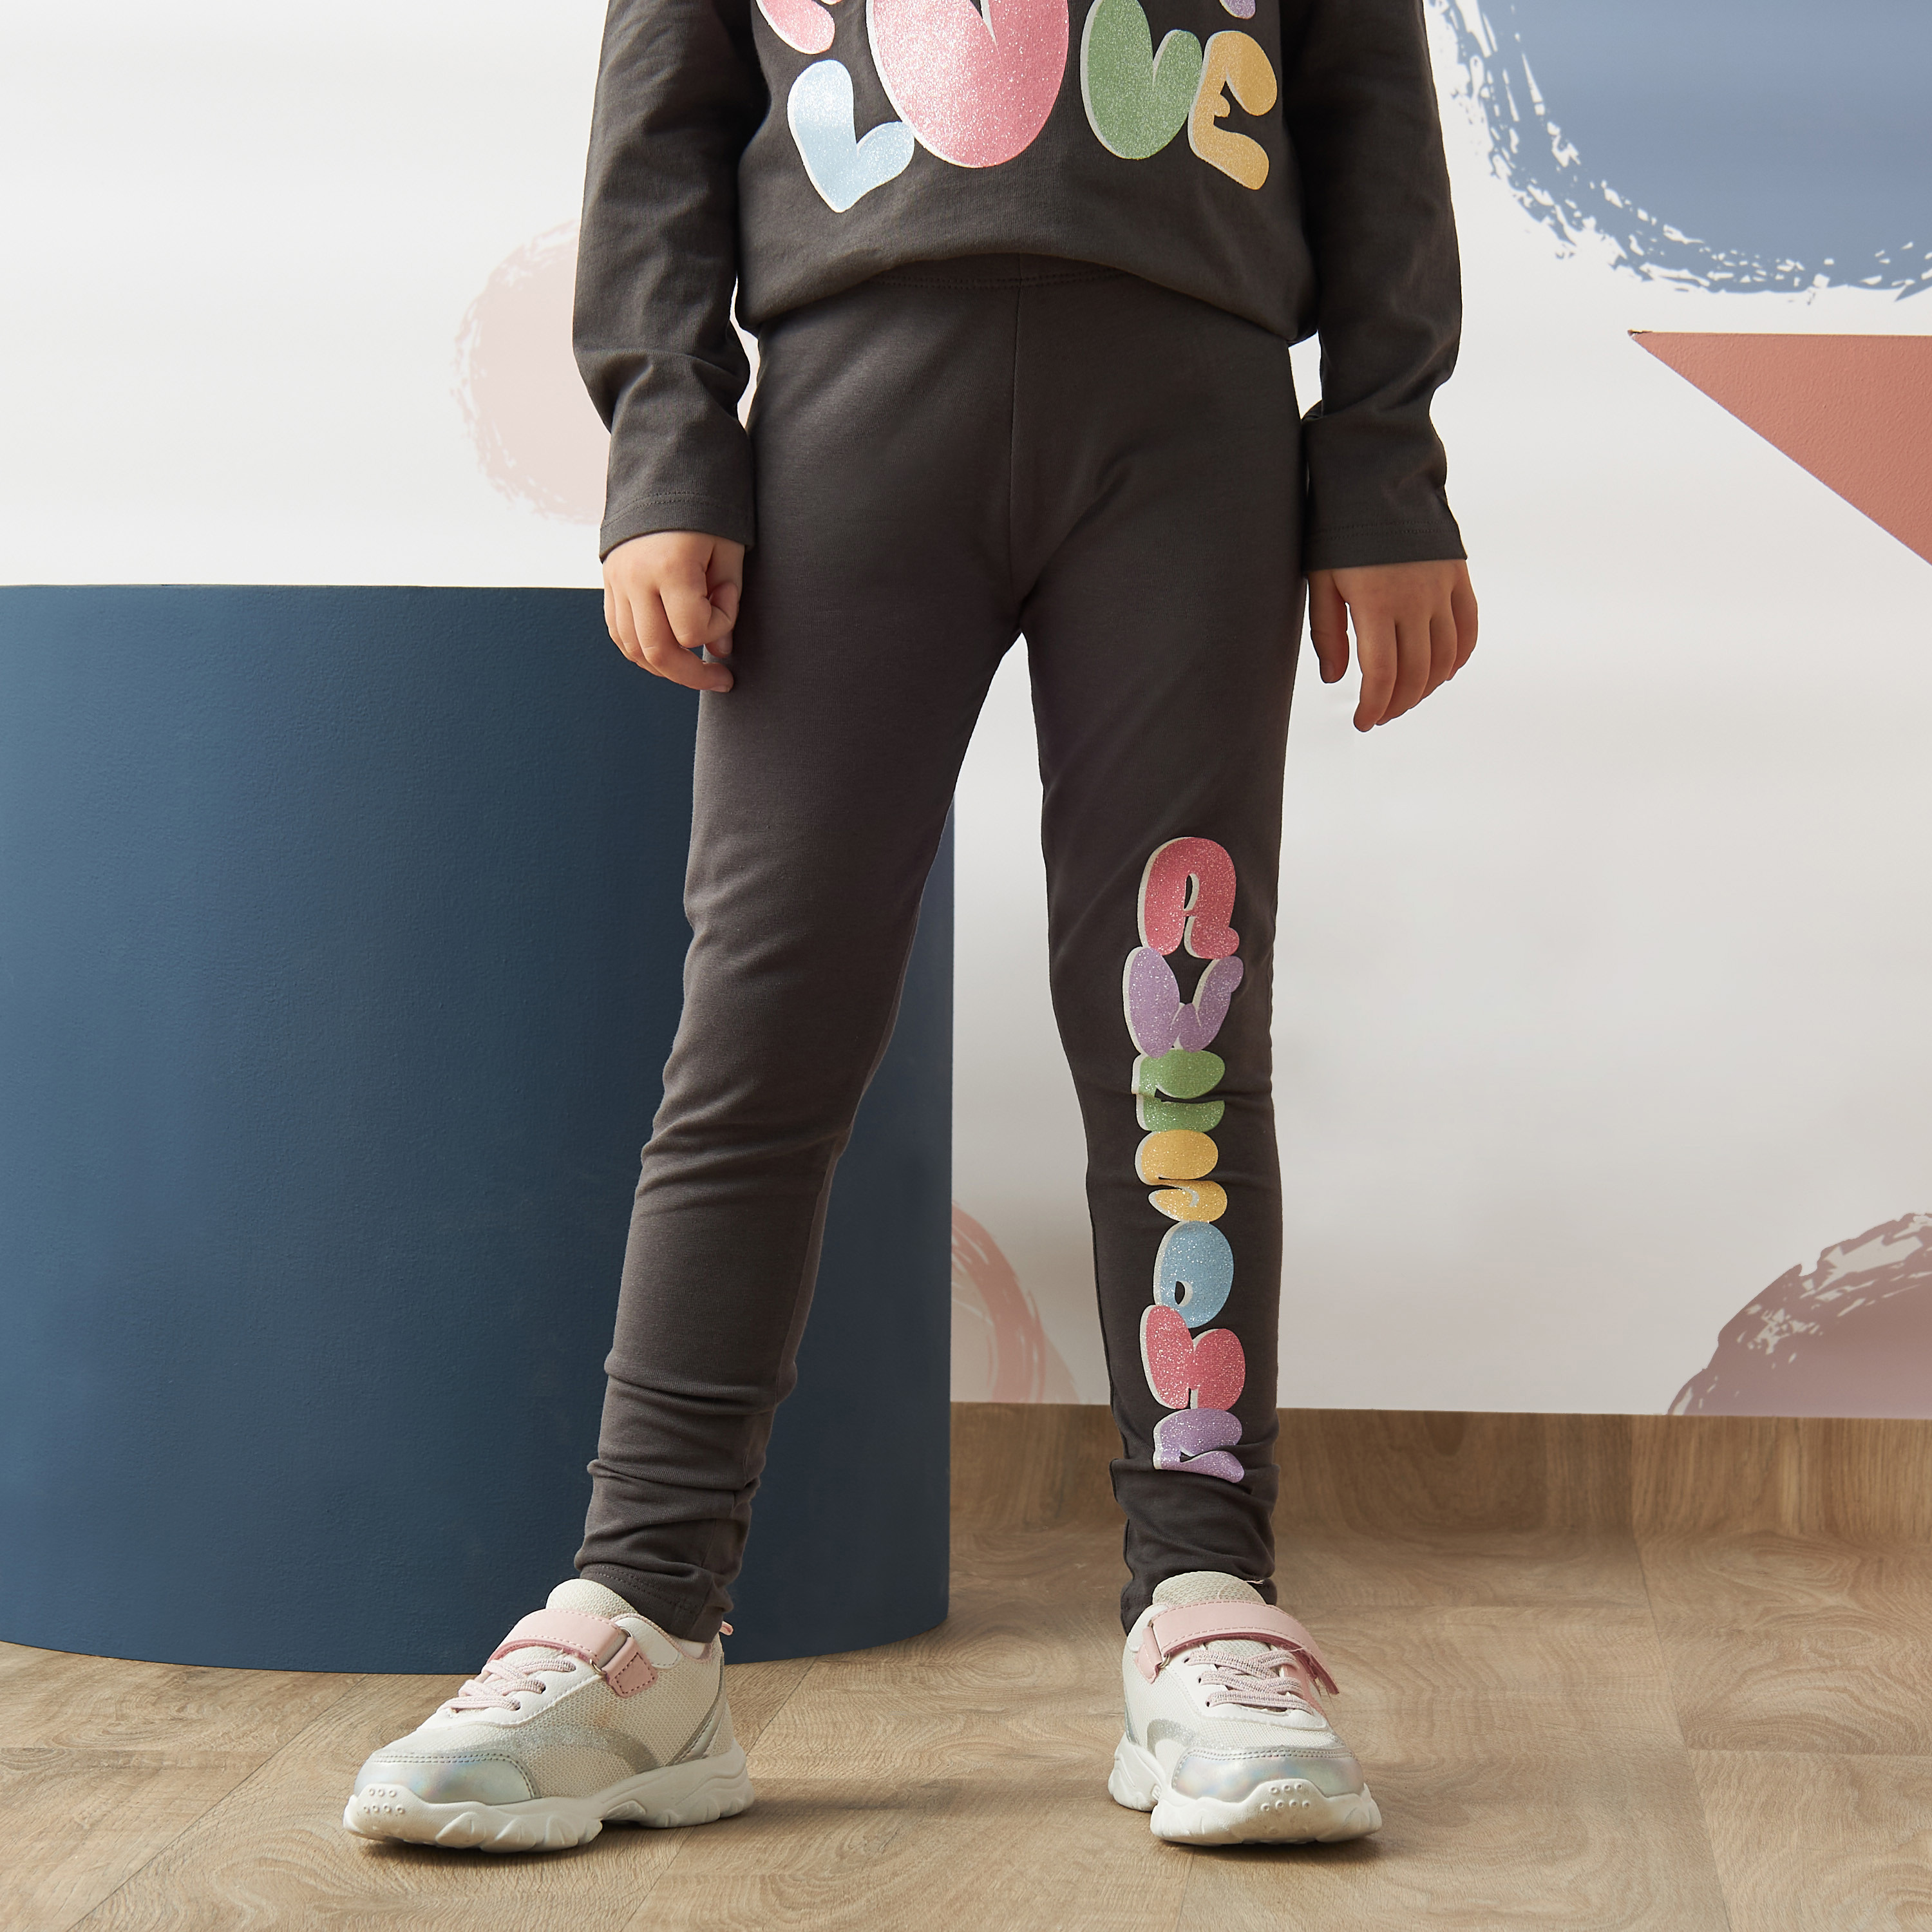 Flower Print Toddler Toddler Leggings For Girls 2017 Spring Collection From  The_one, $2.92 | DHgate.Com